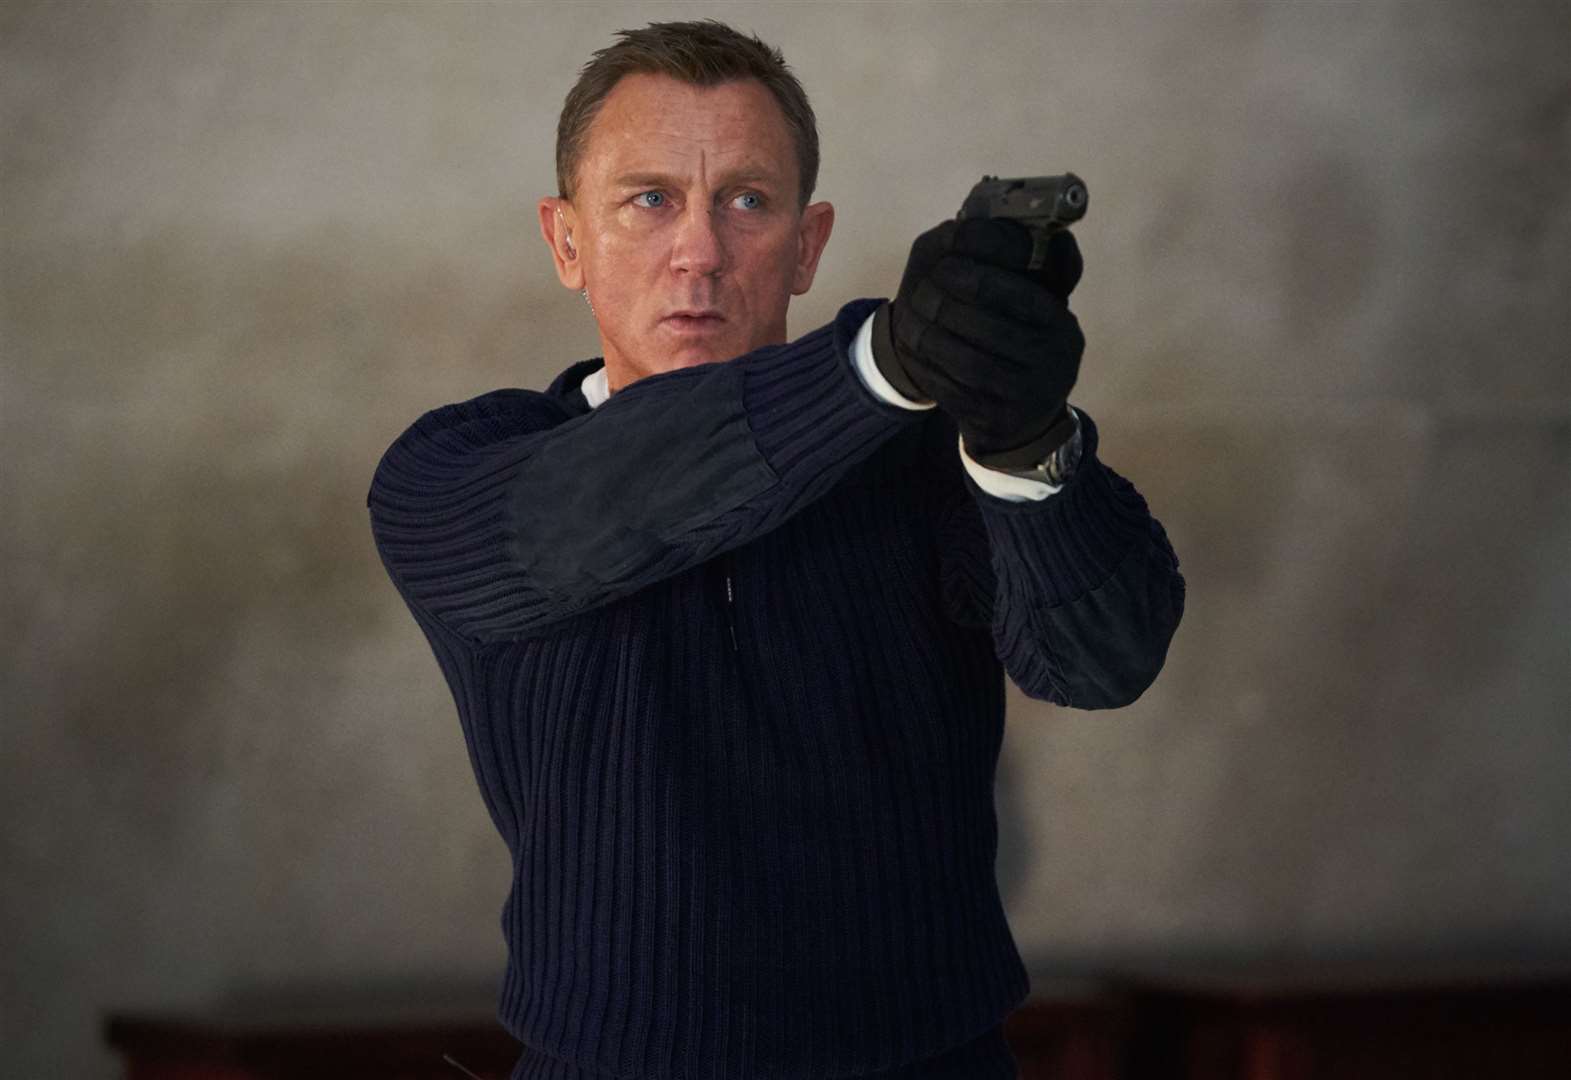 New Bond movie to 'bring thousands' to town's cinema